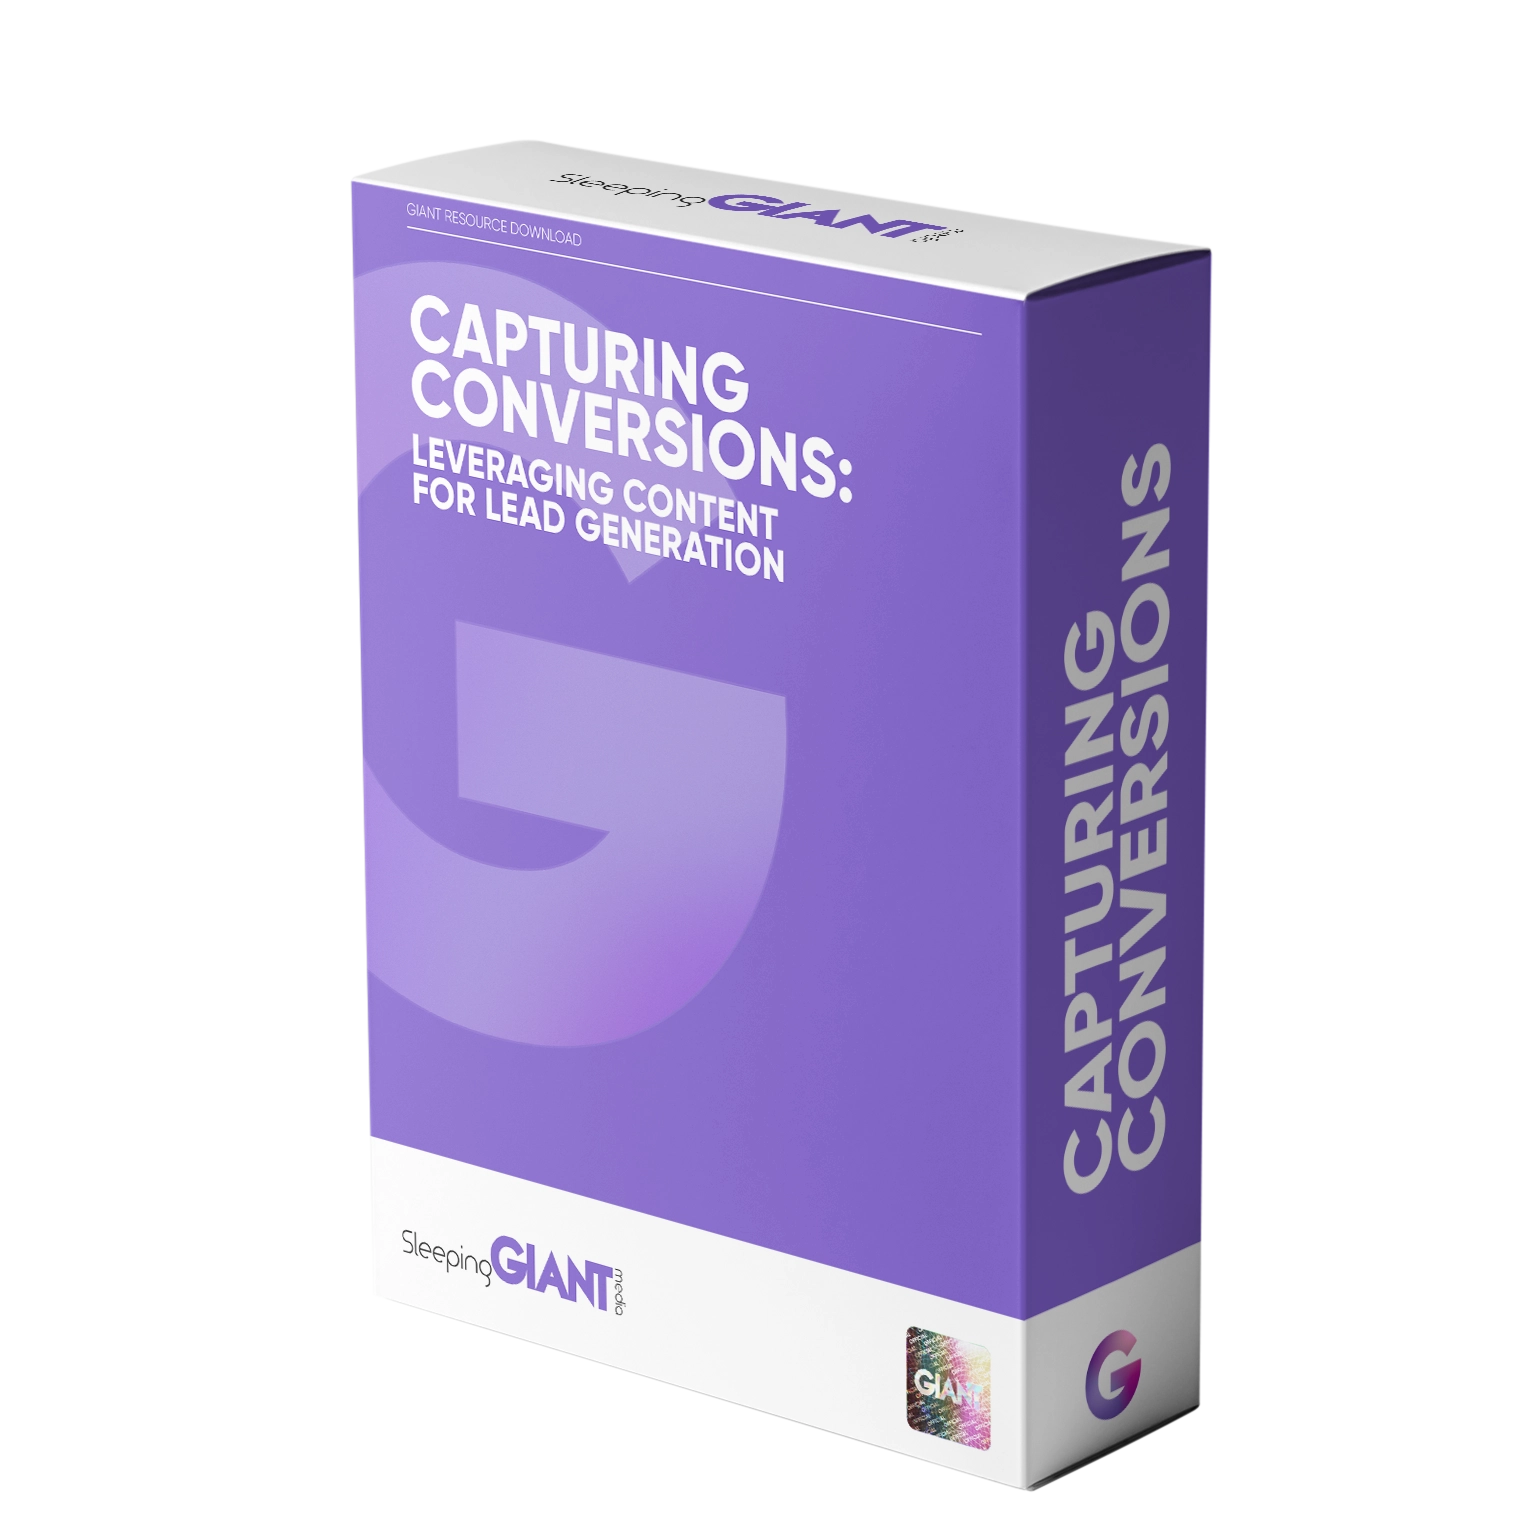 a box labelled Capturing Conversions with Sleeping Giant Media branding